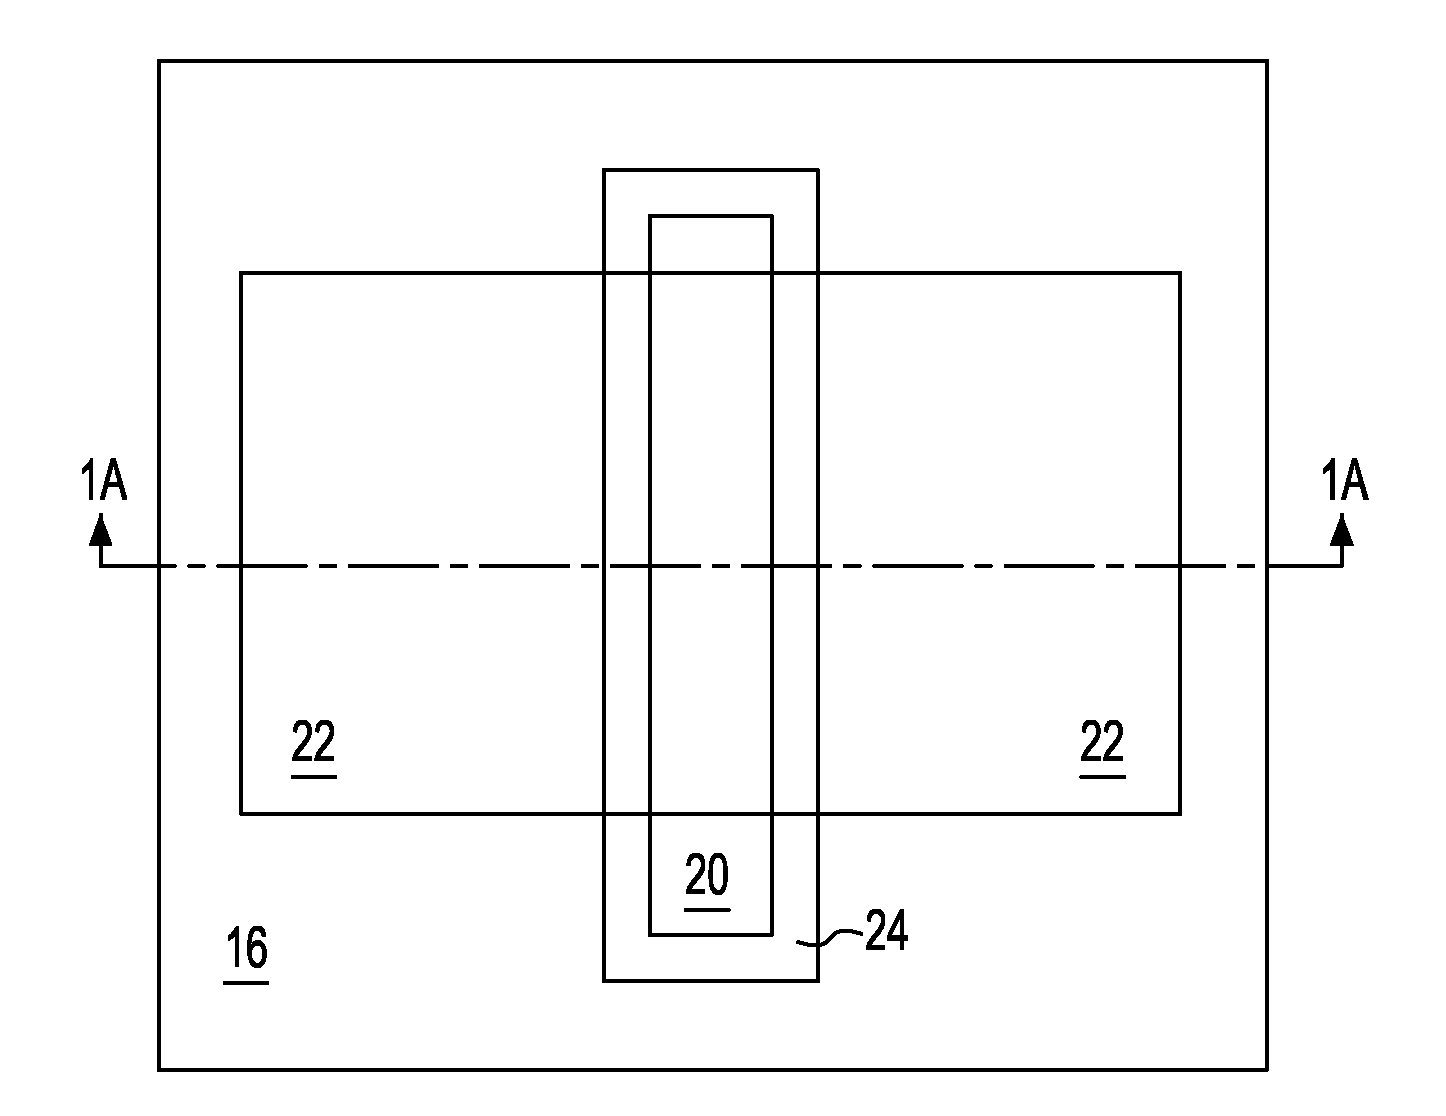 Mosfet with body contacts